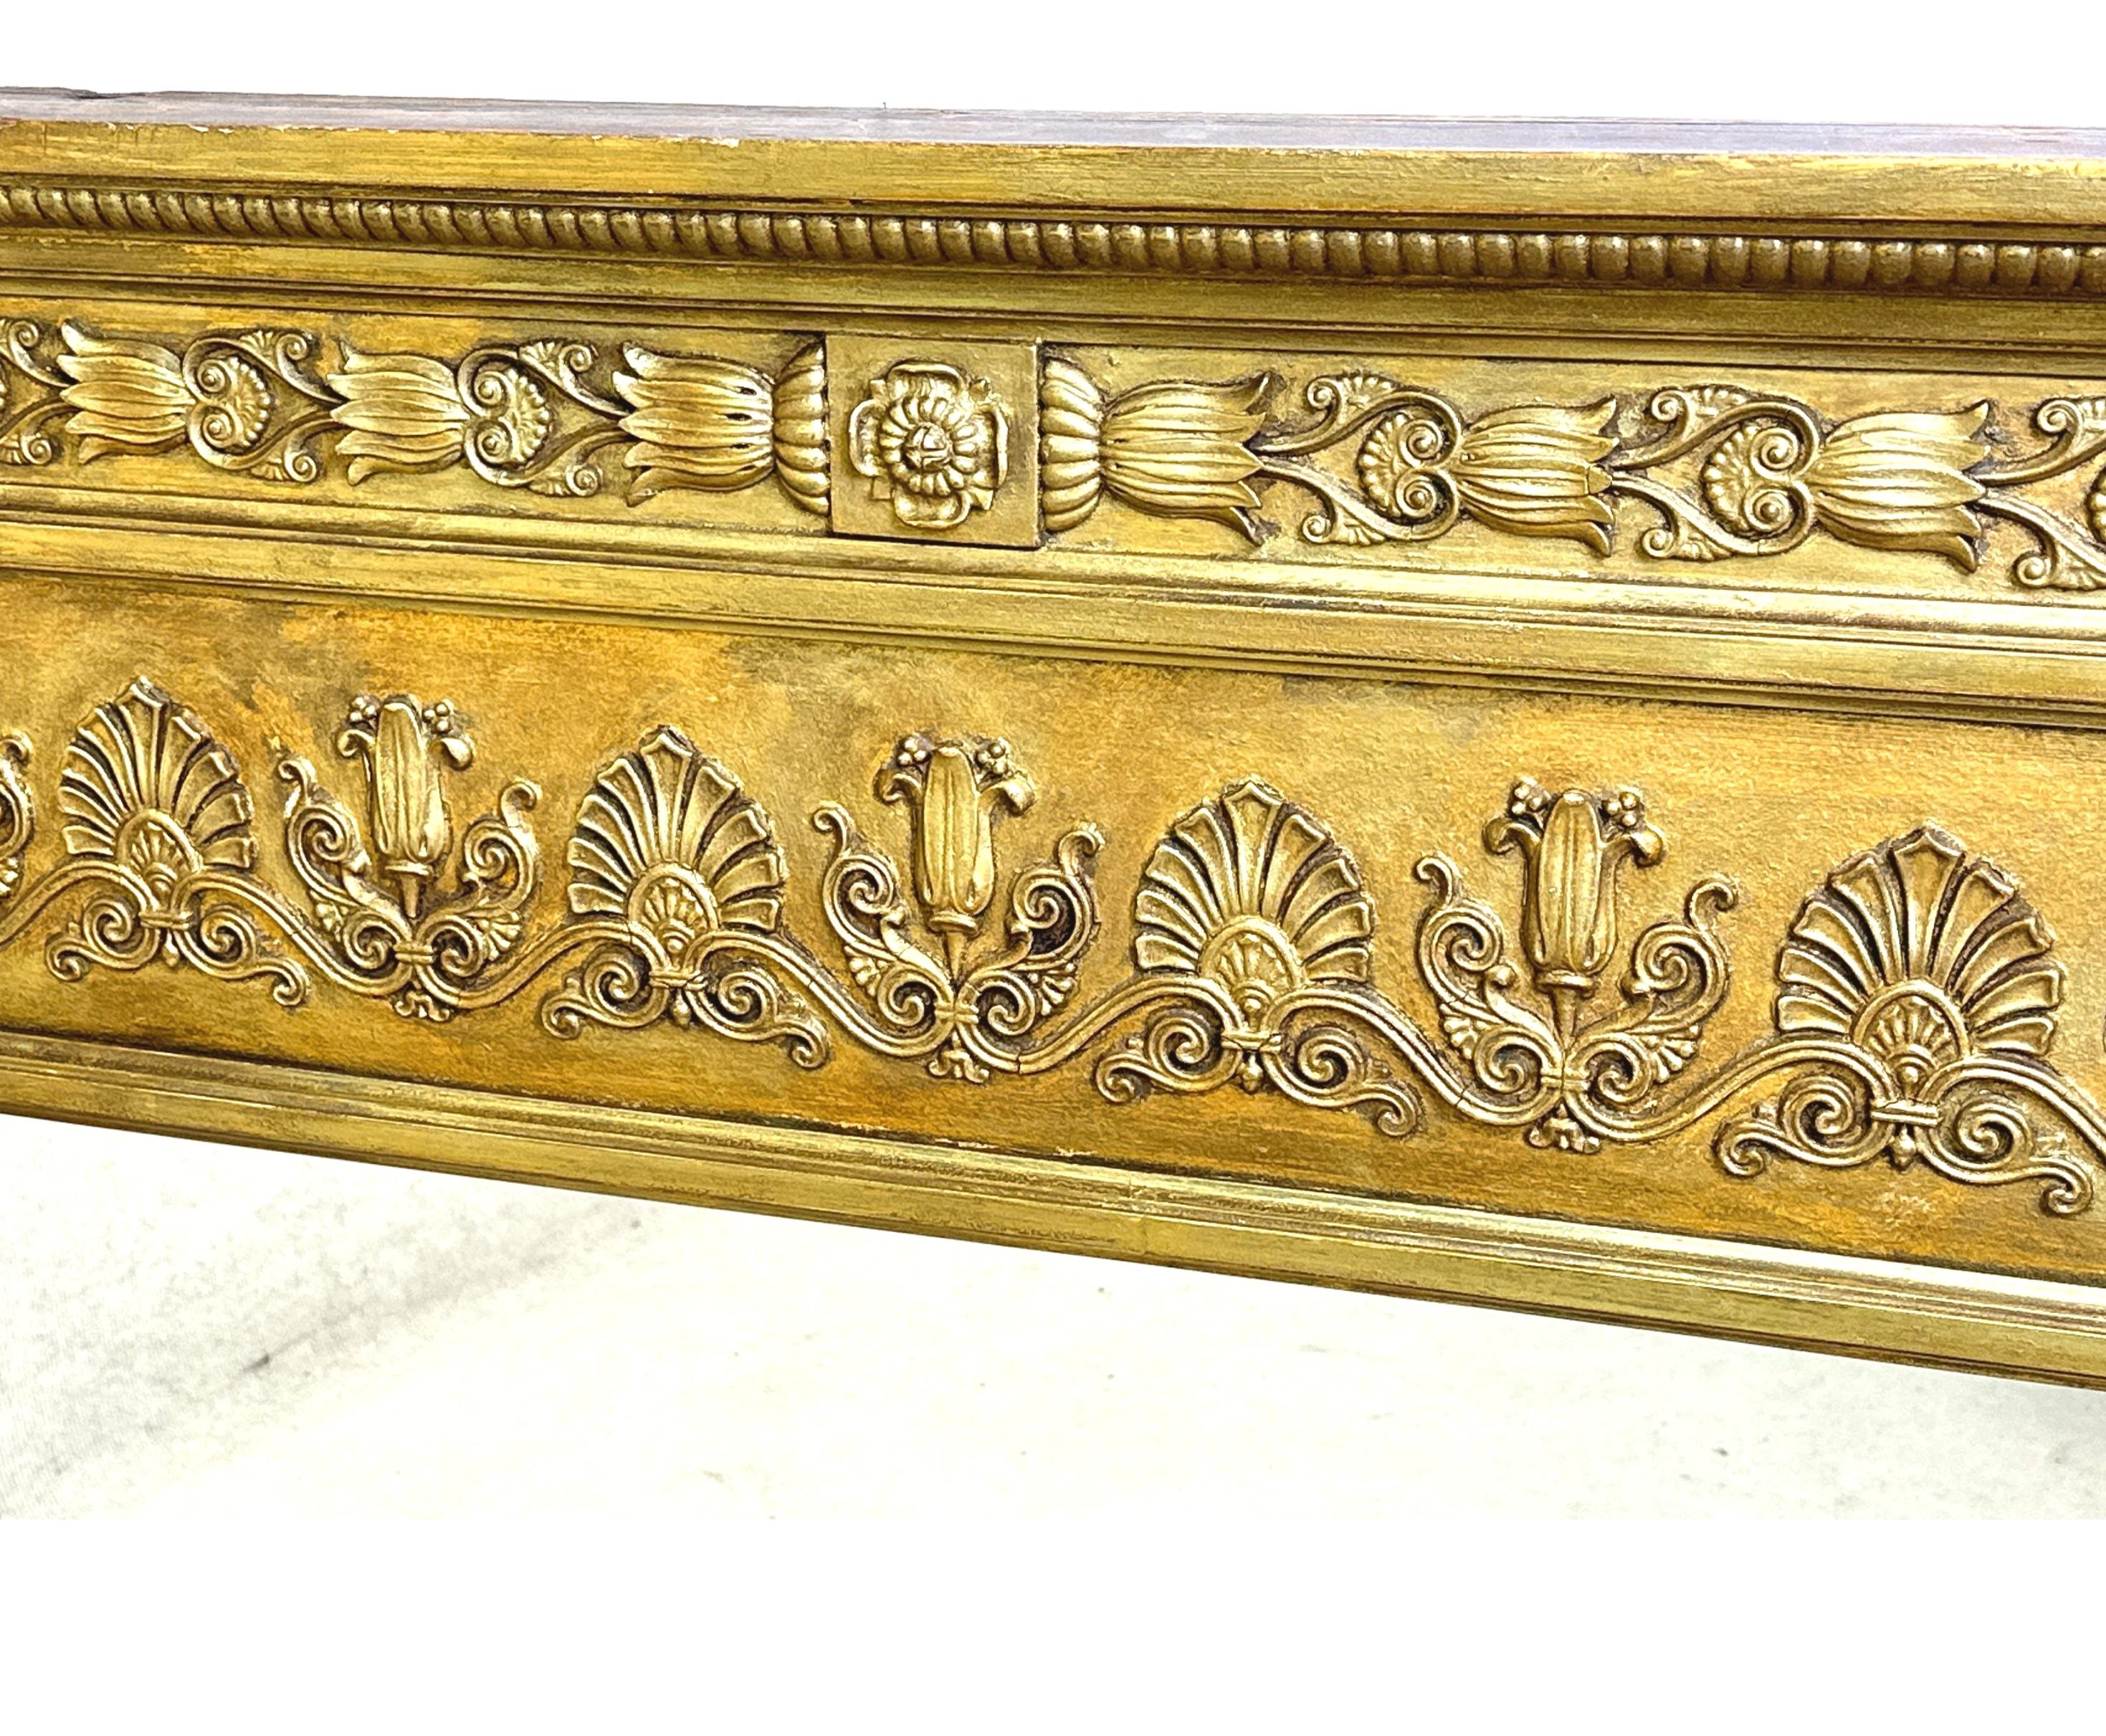 A Very Attractive 19th Century Regency Period Giltwood & Gesso Overmantle Mirror, Having Replacement Triple Mirror Plates, Enclosed By Exceptionally Carved Borders Incorporating S Scrolls, Anthemions, Patrae And Lotus Leaf Decoration.


As the name